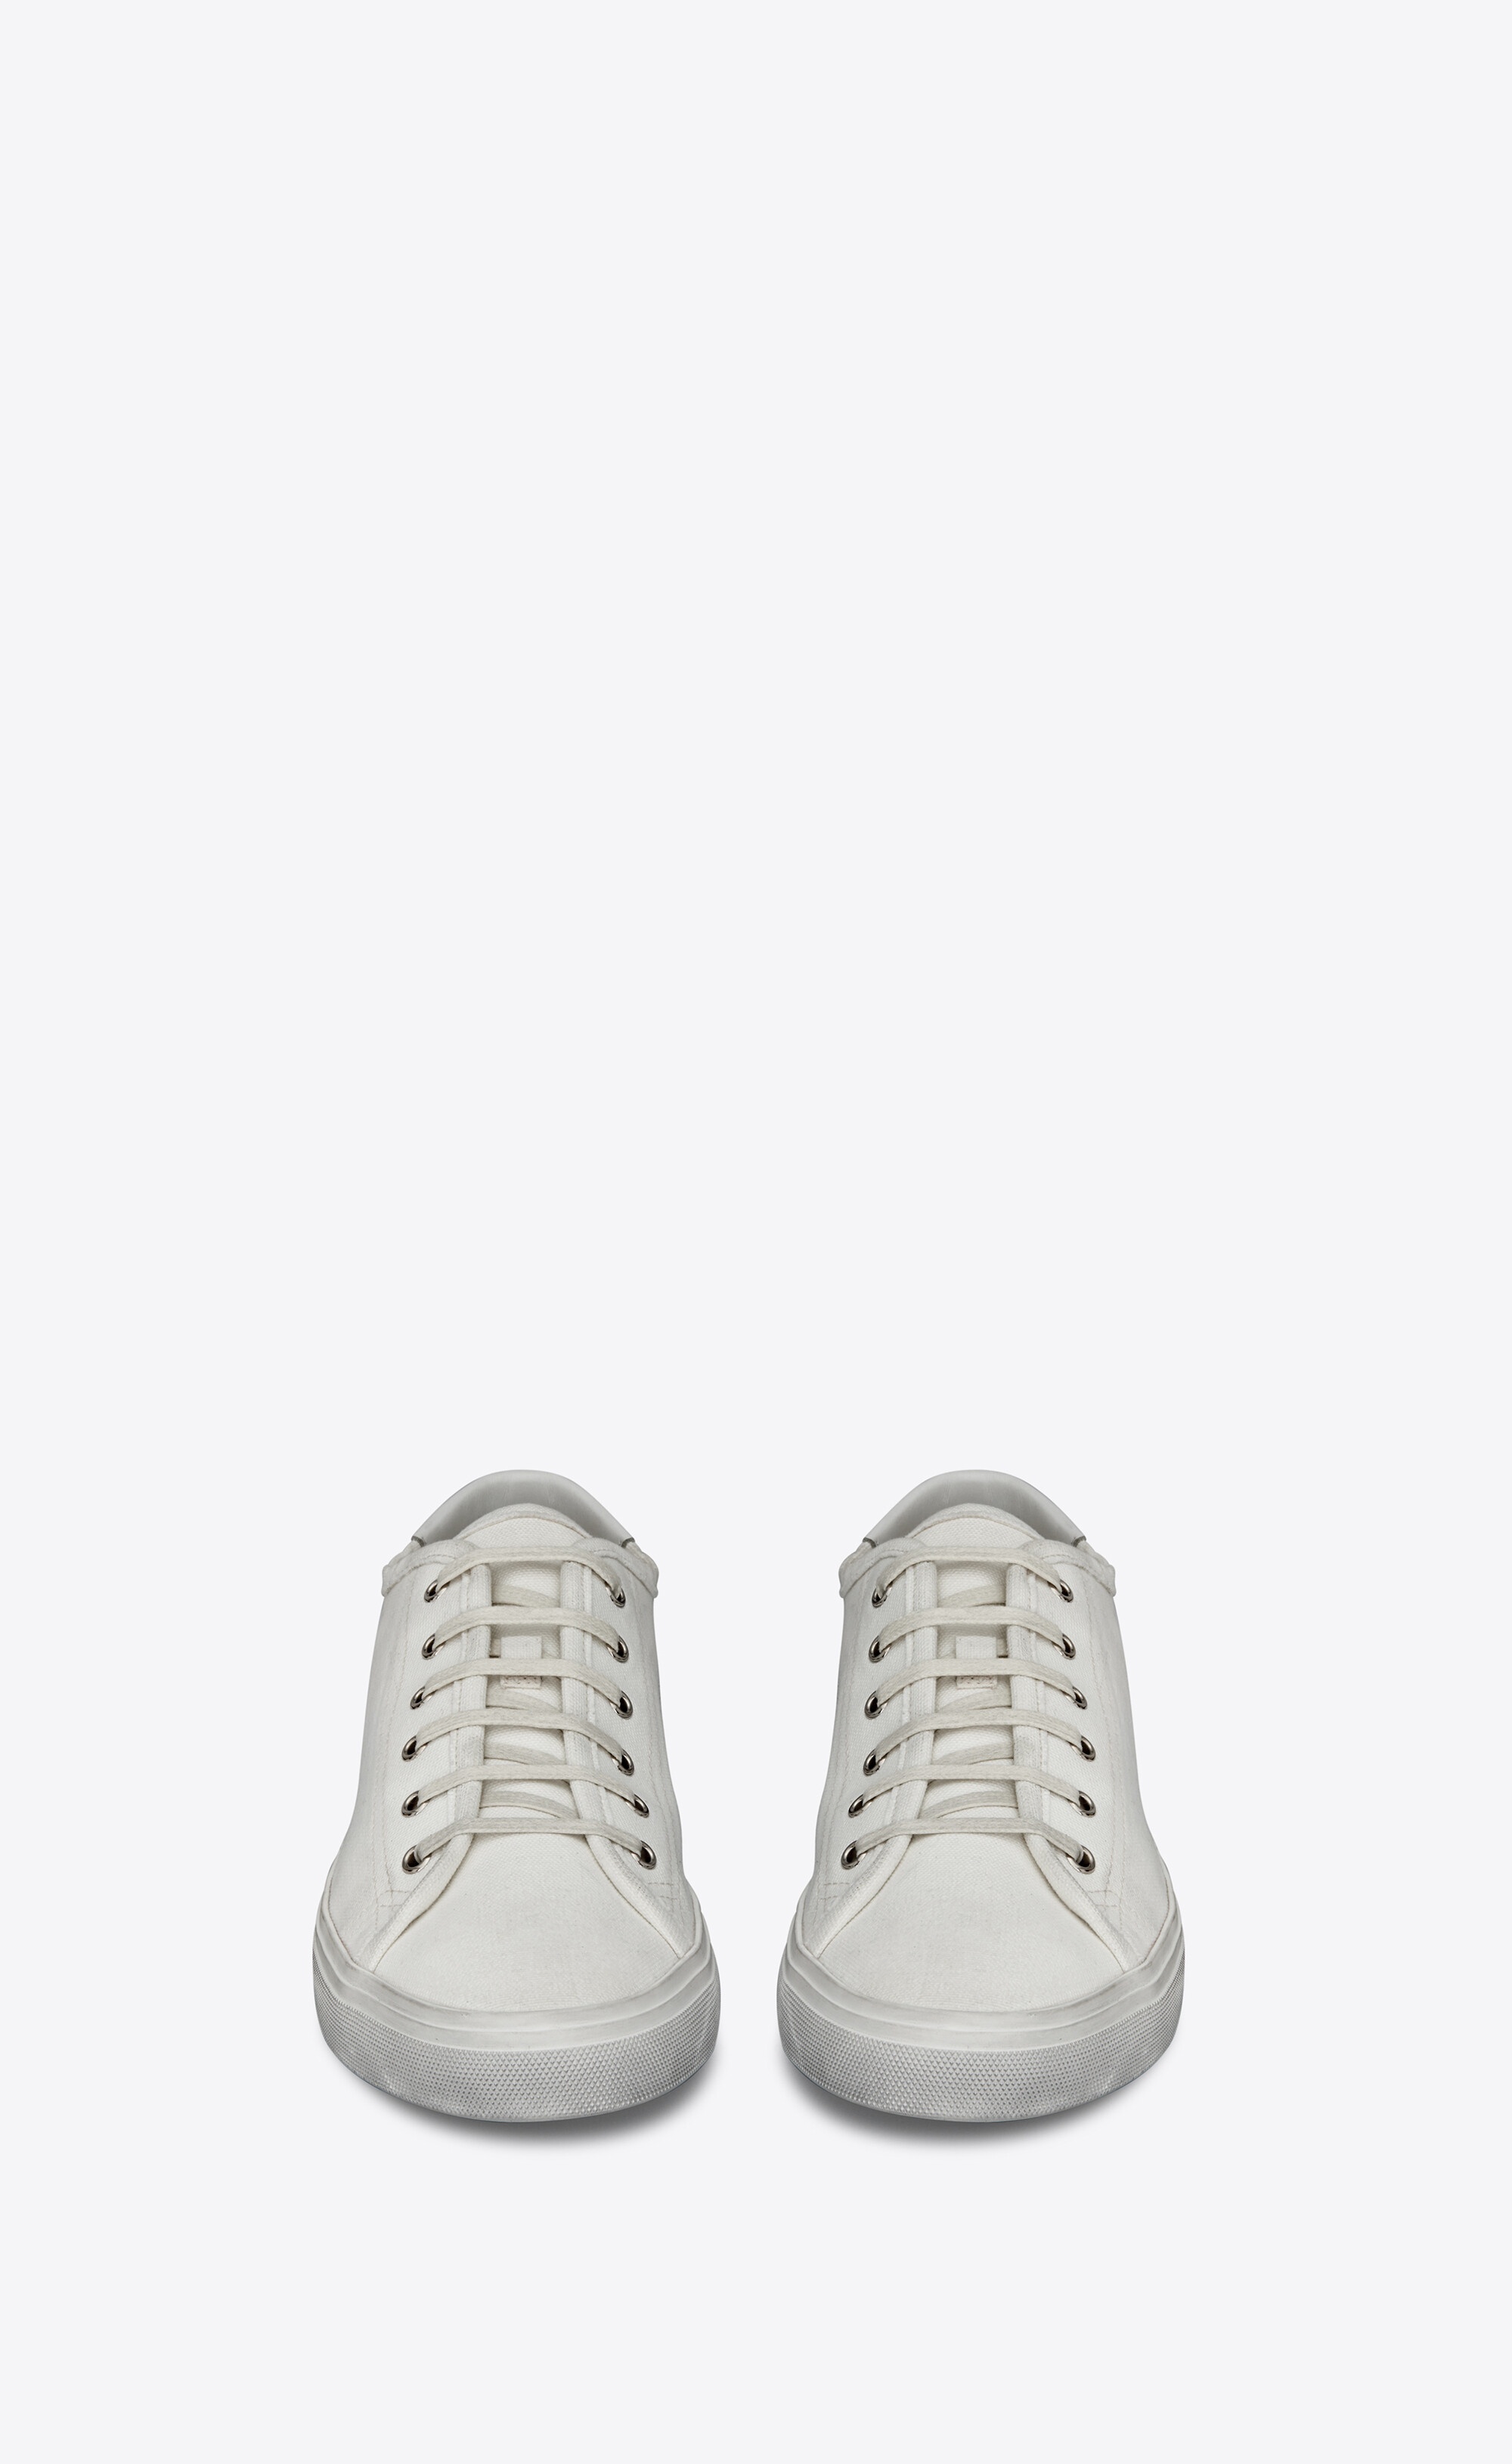 malibu sneakers in canvas and leather - 2